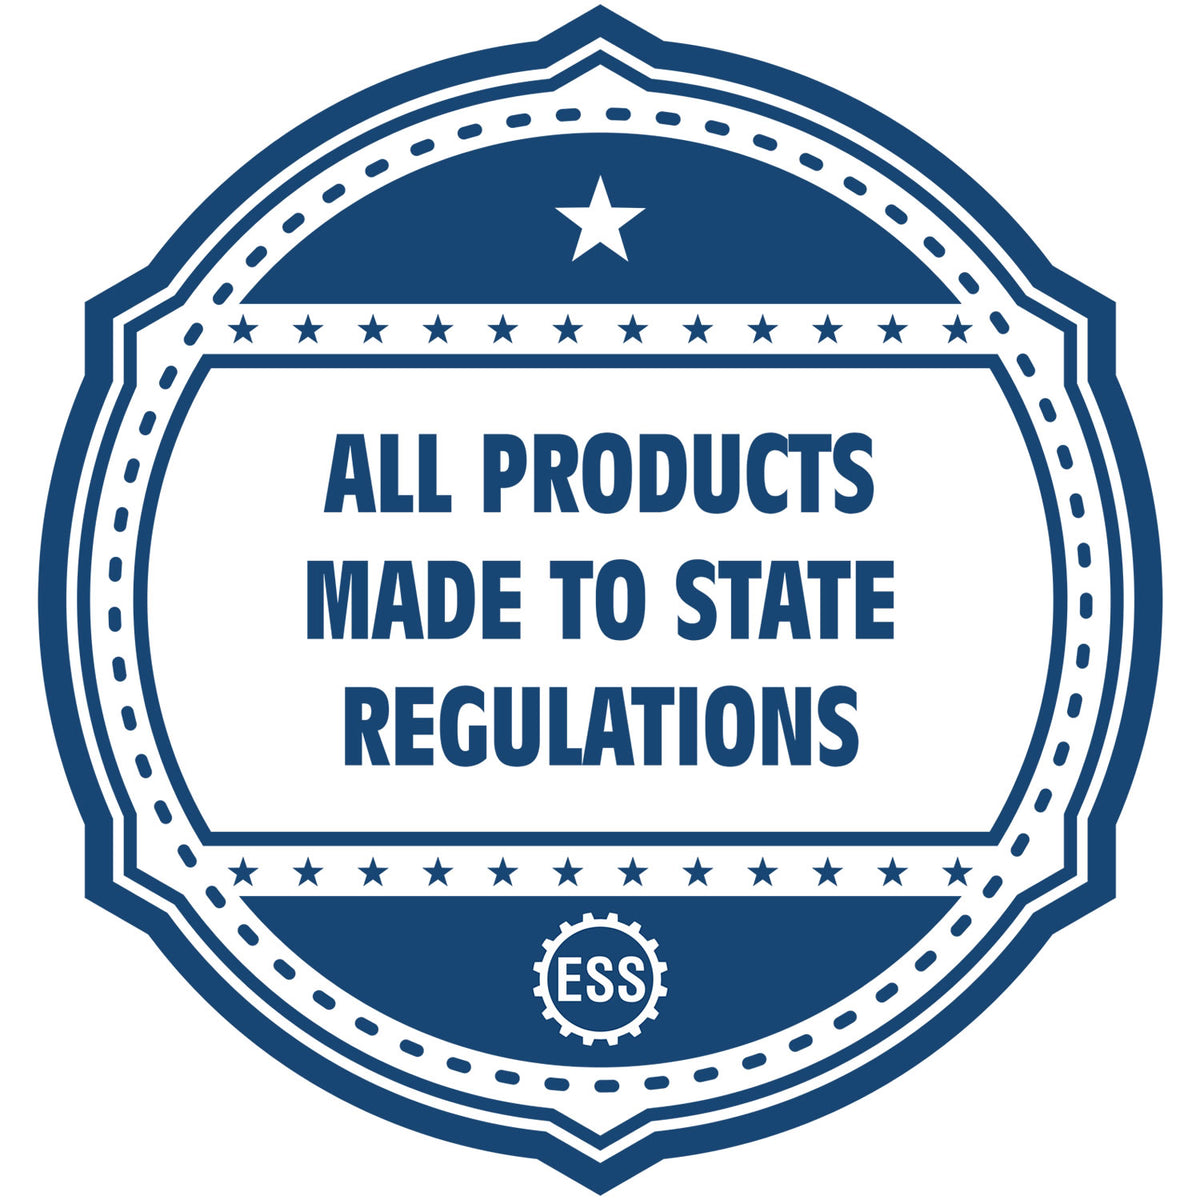 A blue icon or badge for the Gift Wyoming Landscape Architect Seal showing that this product is made in compliance with state regulations.